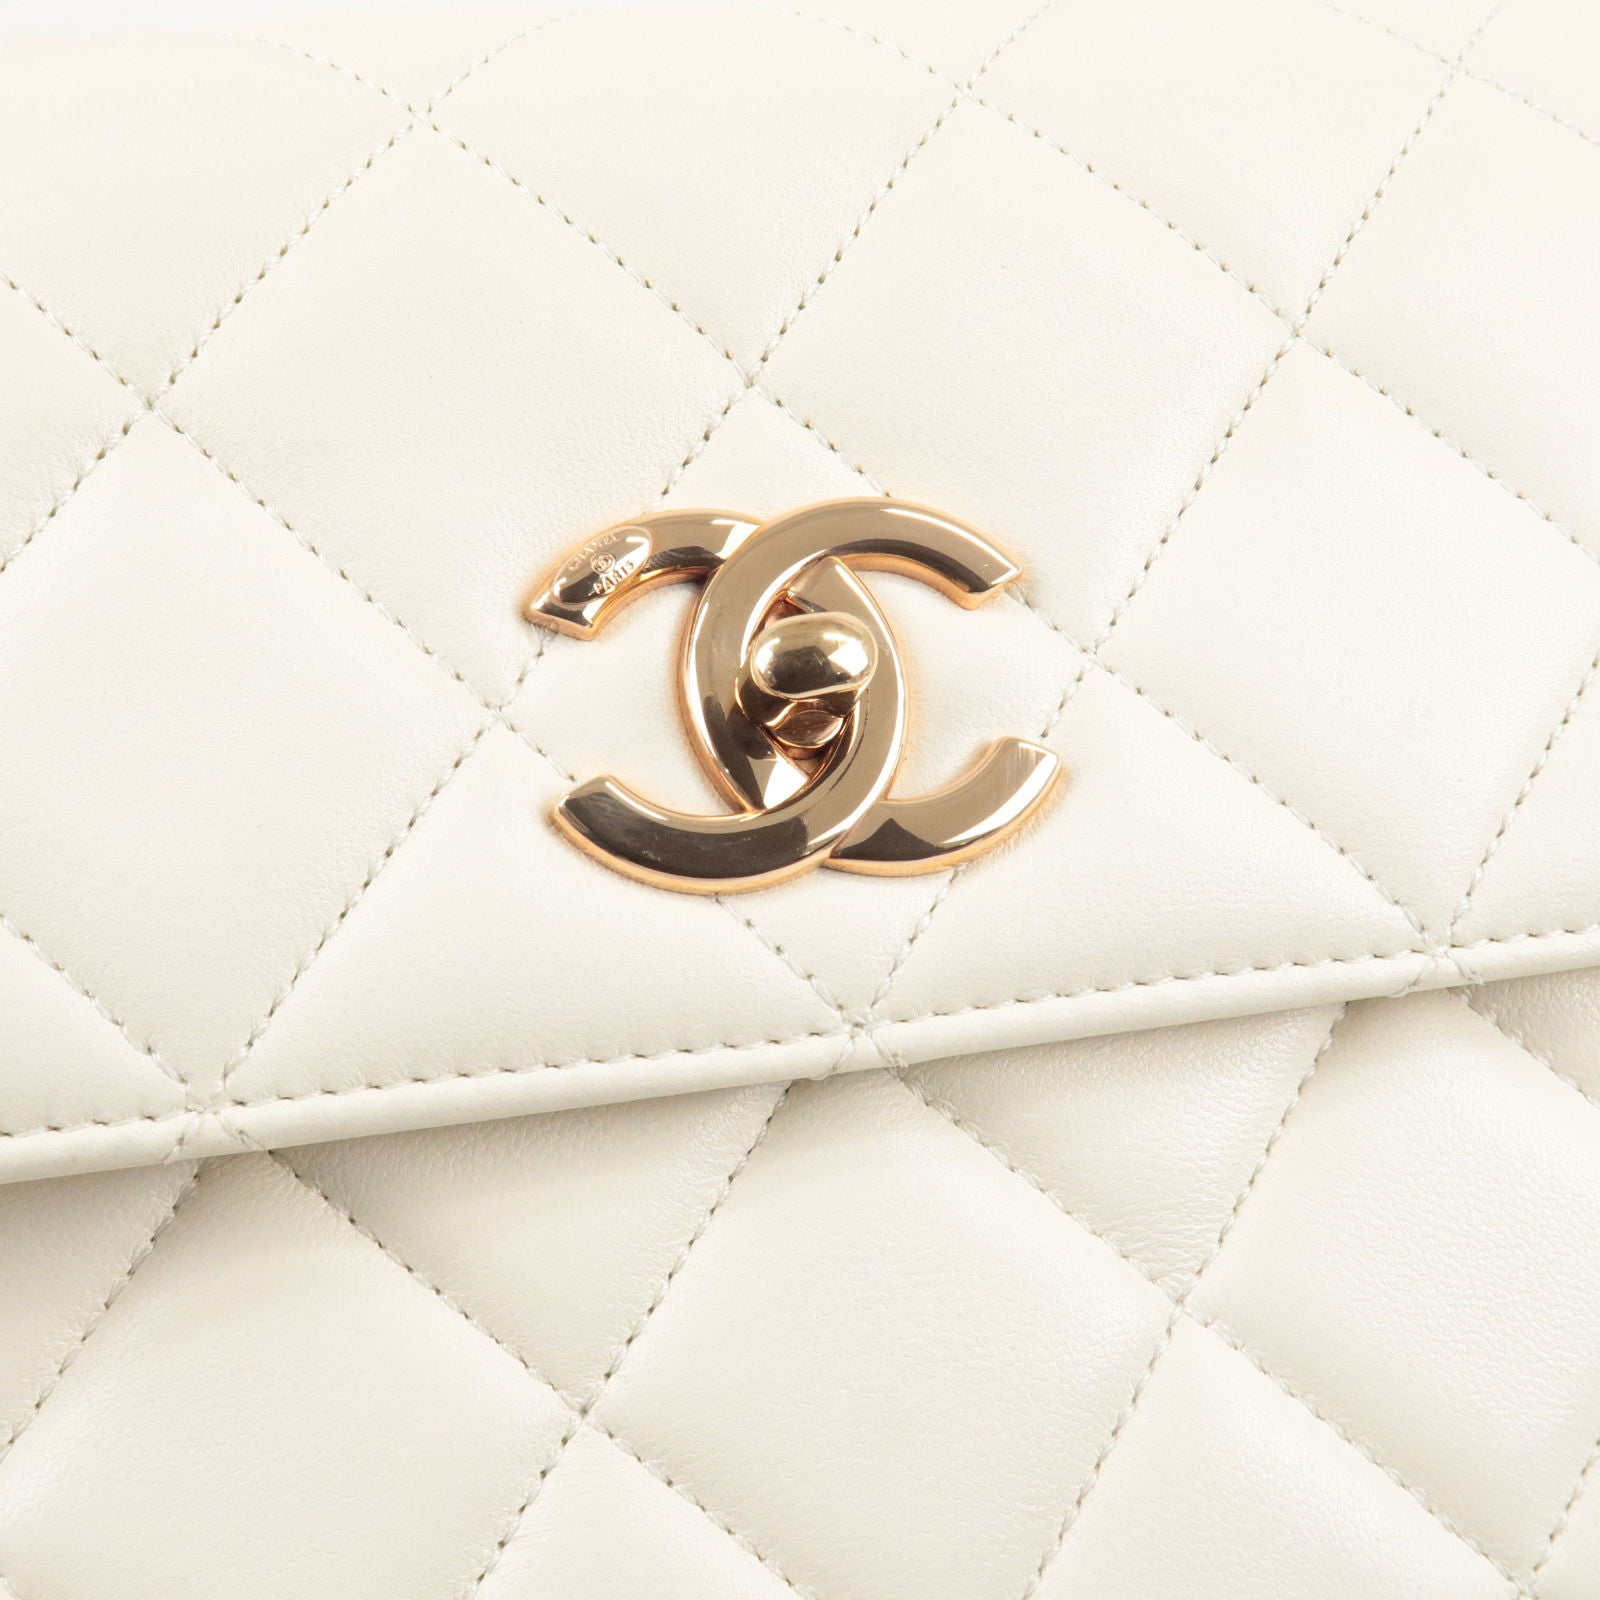 CHANEL Off White Cream Ivory Lambskin Gold CC Small Kelly Top Handle Bag